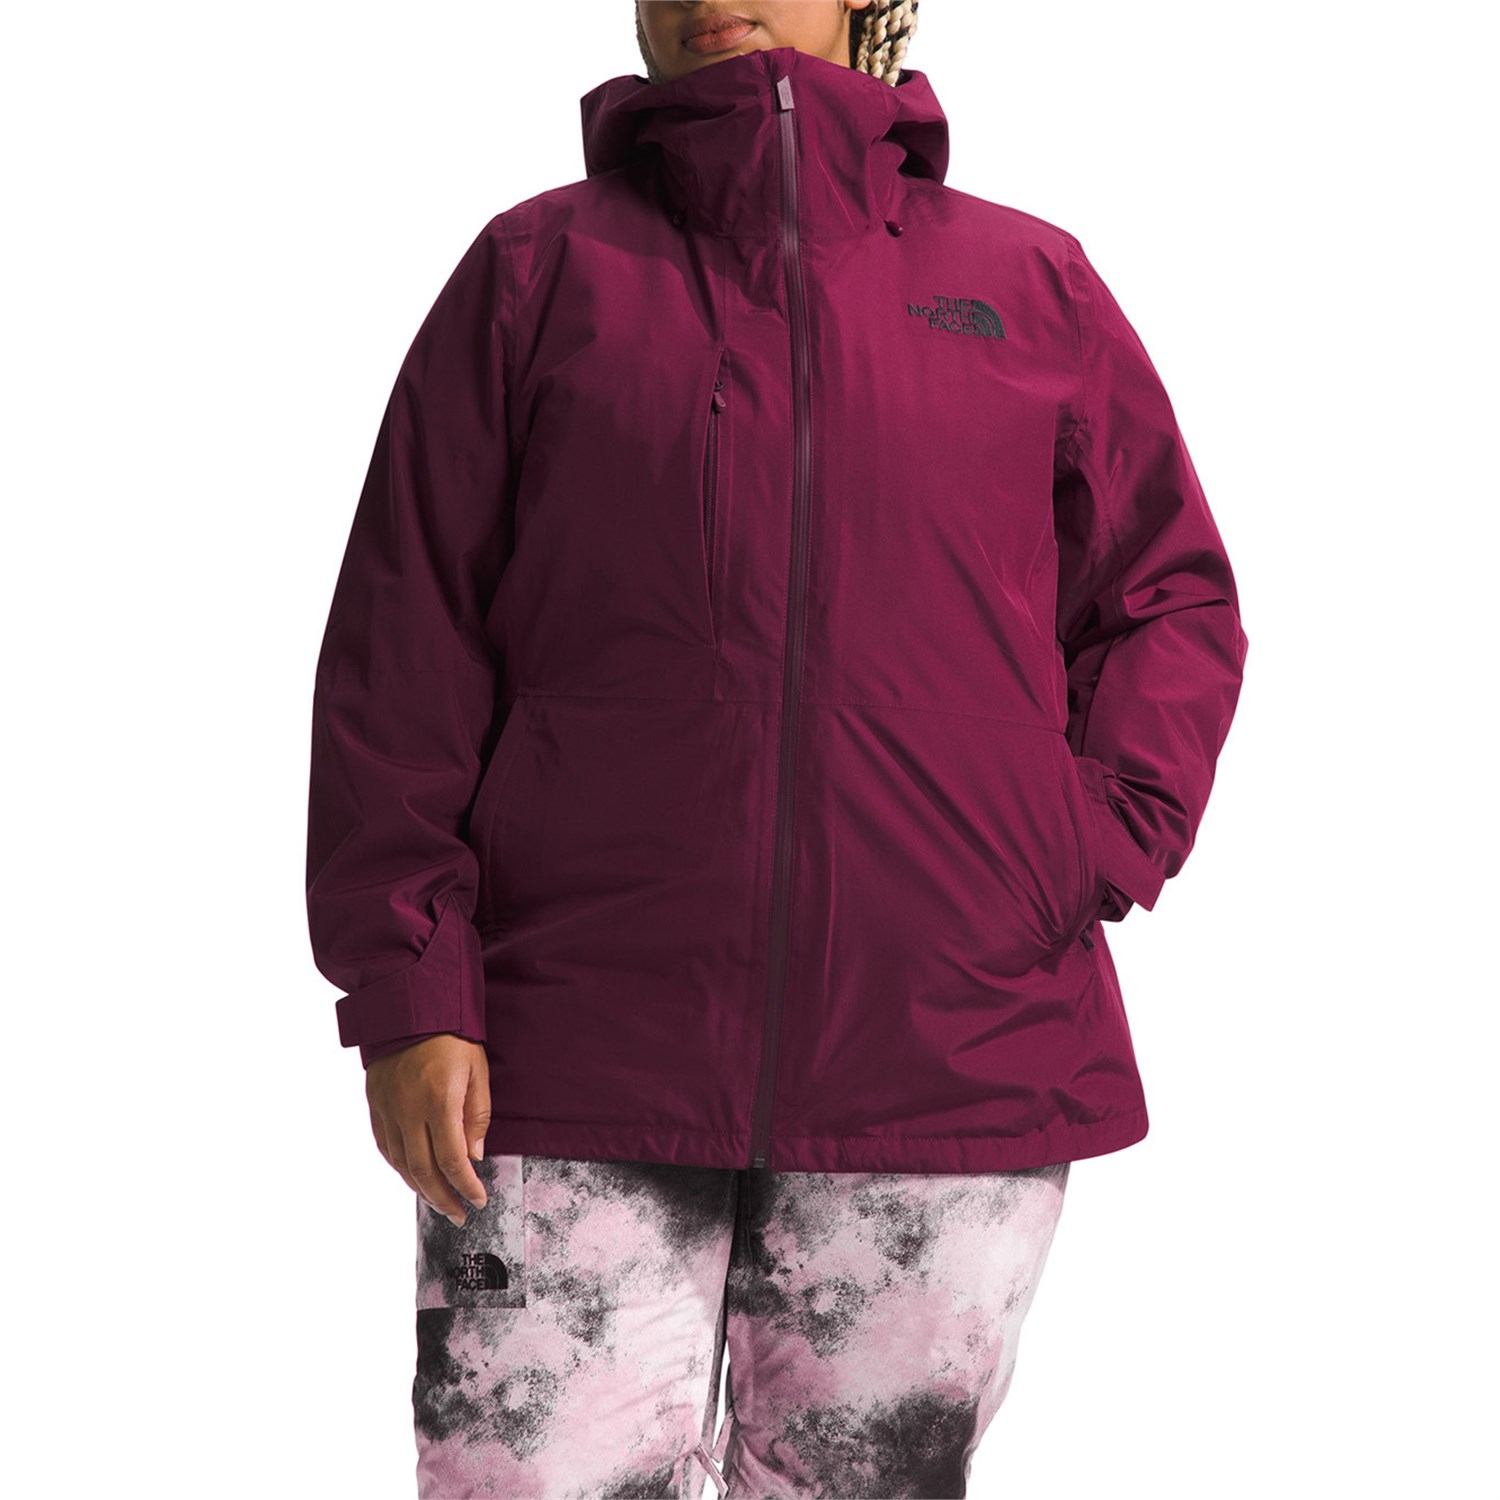 Куртка The North Face Plus ThermoBall Eco Snow Triclimate, цвет Boysenberry куртка thermoball eco snow triclimate мужская the north face цвет cave blue